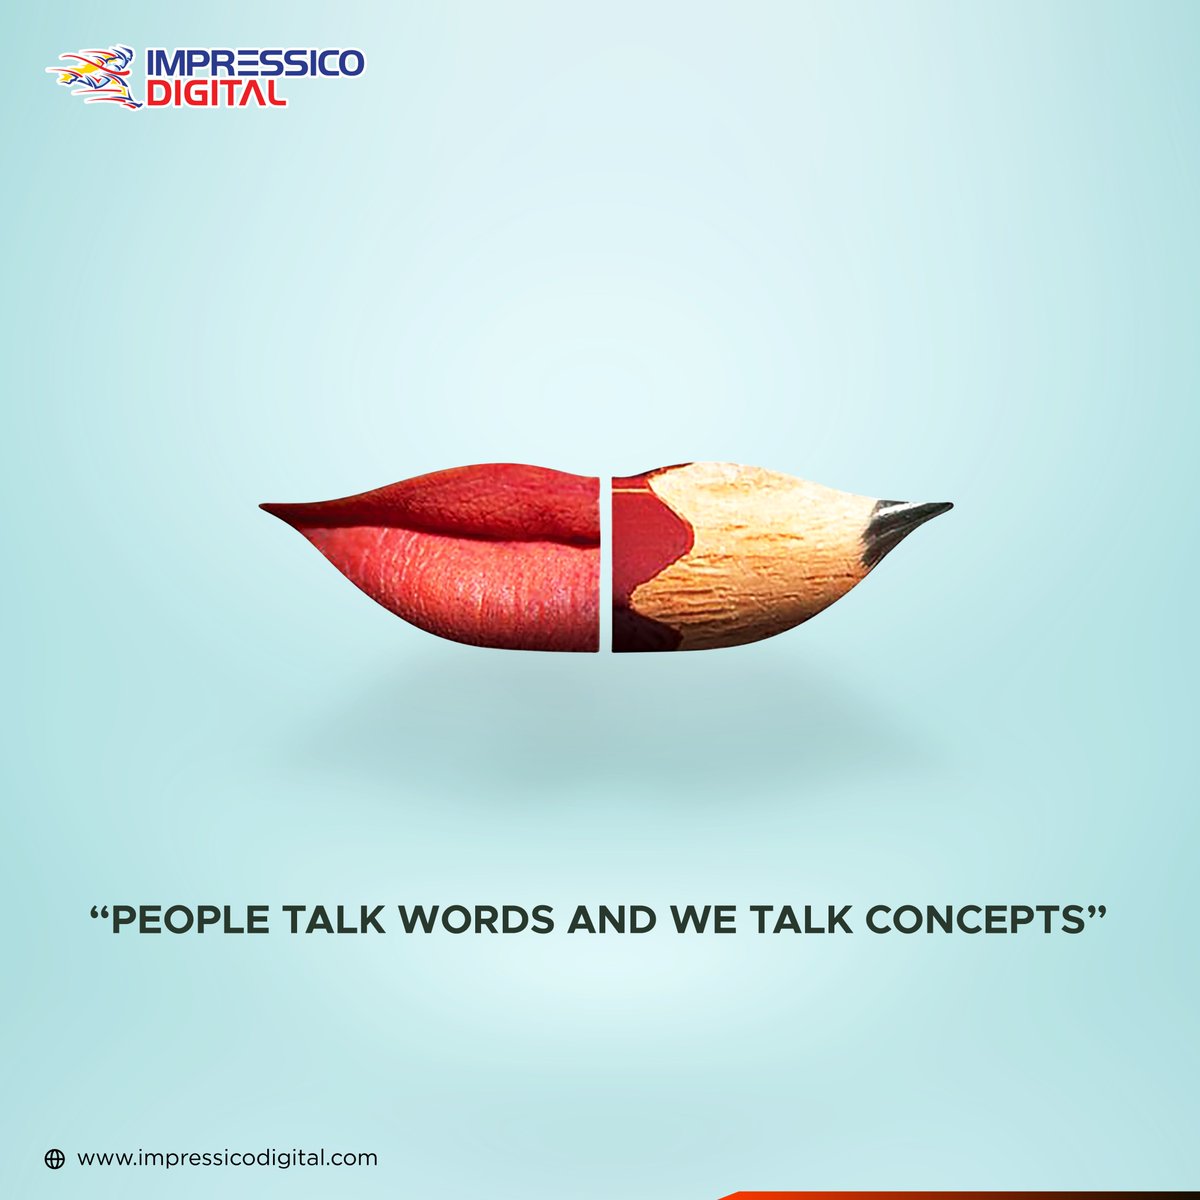 Forget words, let's talk concepts that convert!

We craft campaigns that go beyond words, using powerful ideas to make your brand stand out from the crowd. Ready to turn heads and drive results?  Contact Now!

#ImpressicoDigital #ConceptMarketing #BeyondTheOrdinary #360Digital